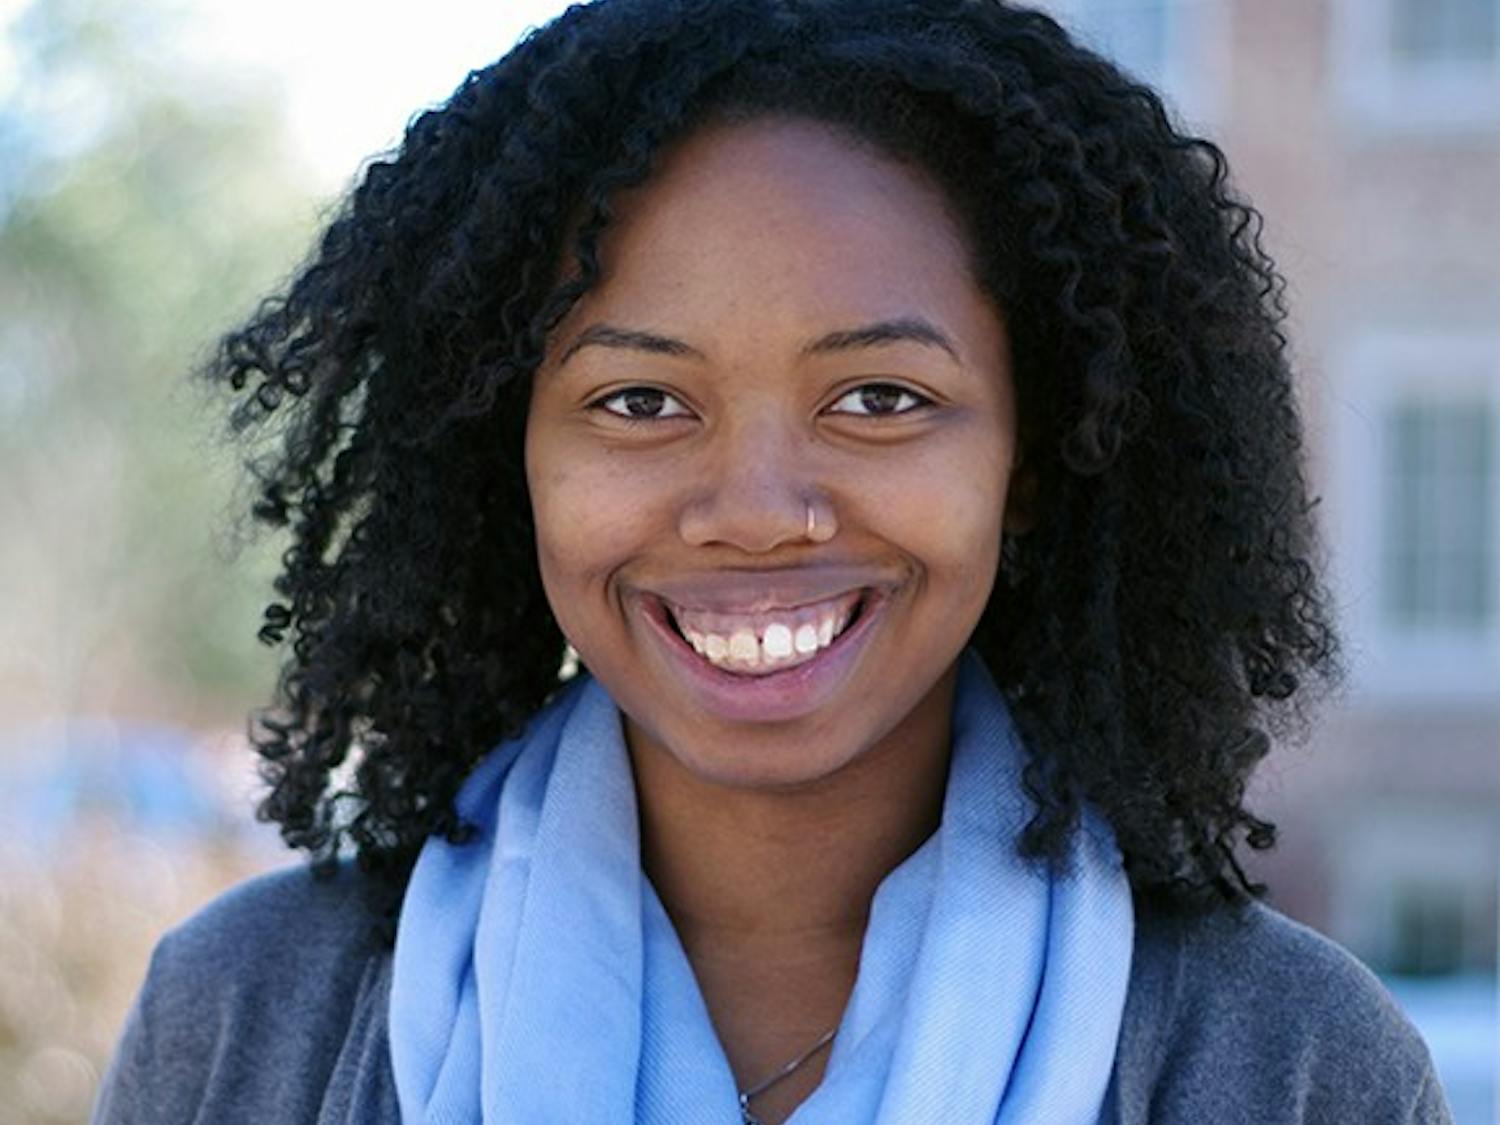 Shelby Eden Dawkins-Law is running for Graduate School President. Dawkins-Law is a first year PhD student in education with a concentration in policy leadership and school improvement.